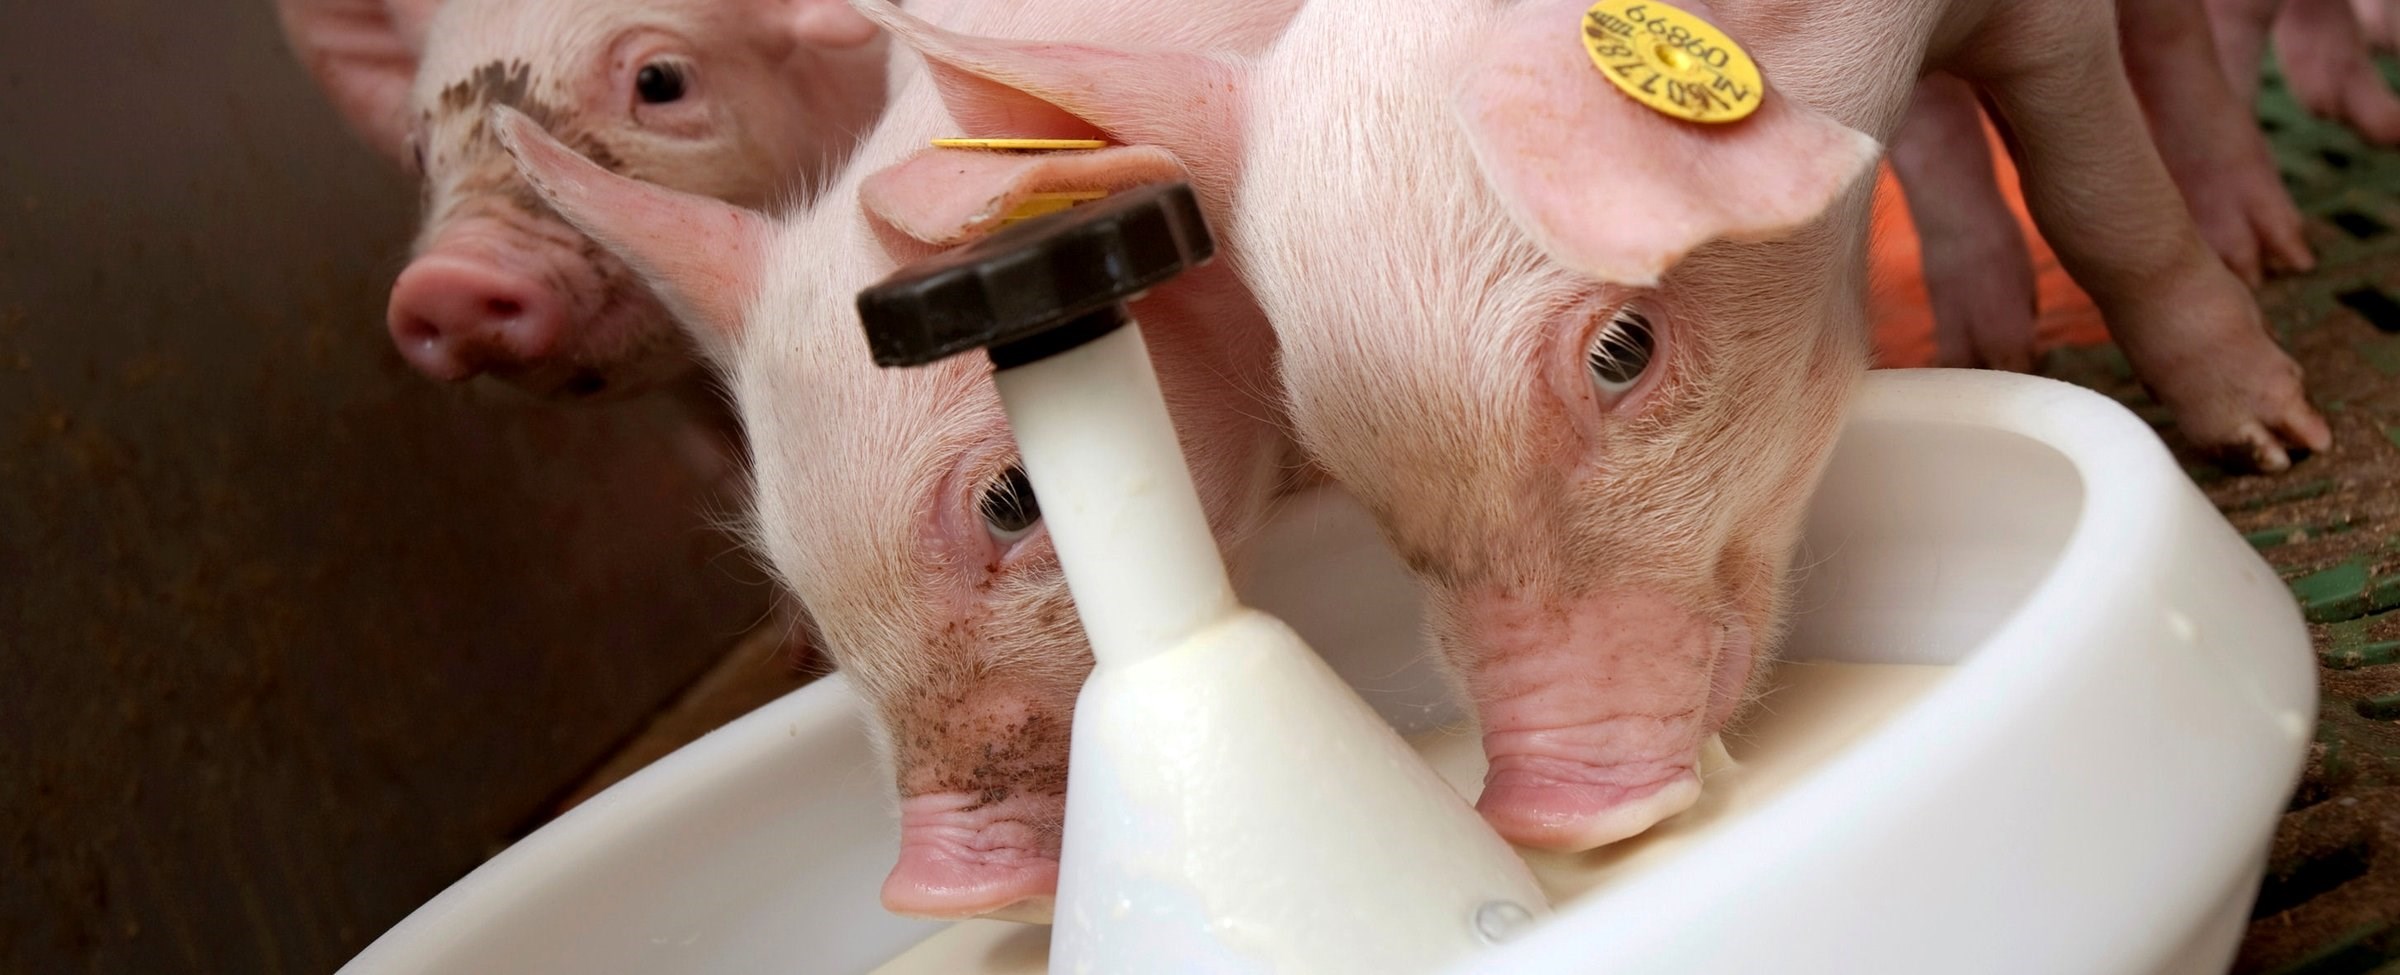 Piglets feed and water management